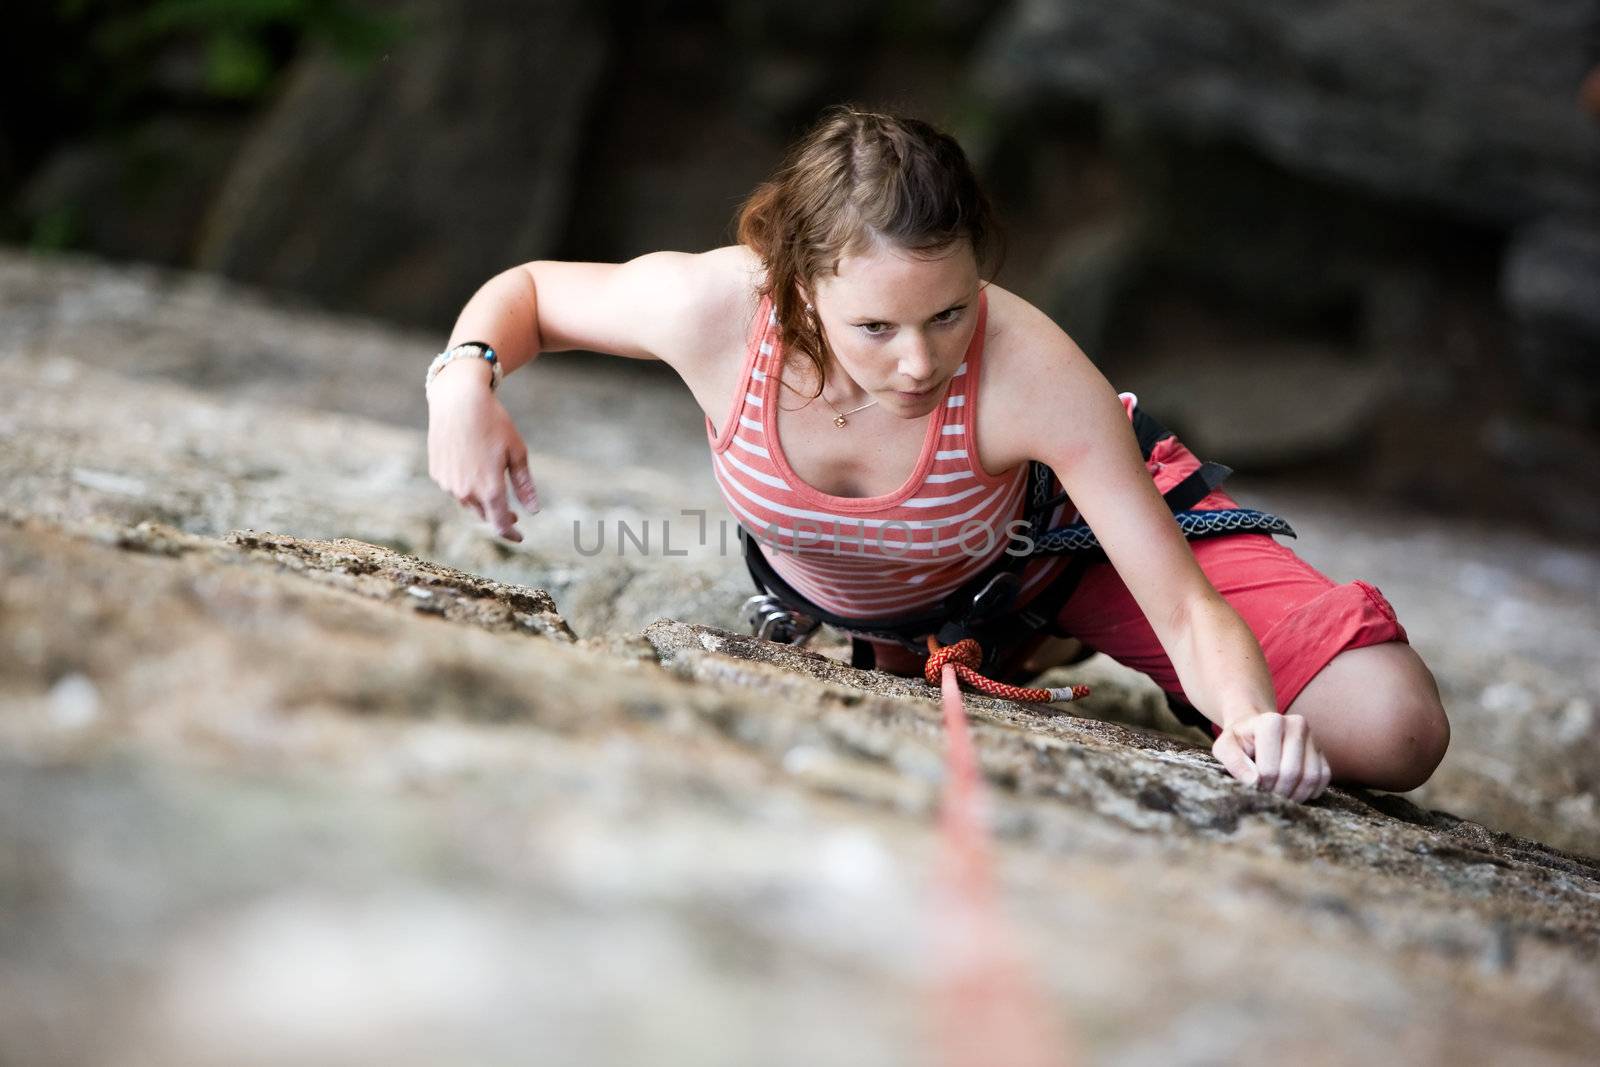 A female climber on a steep rock face viewed from above with the belayer in the background.  Shallow depth of field is used to isolated the climber.